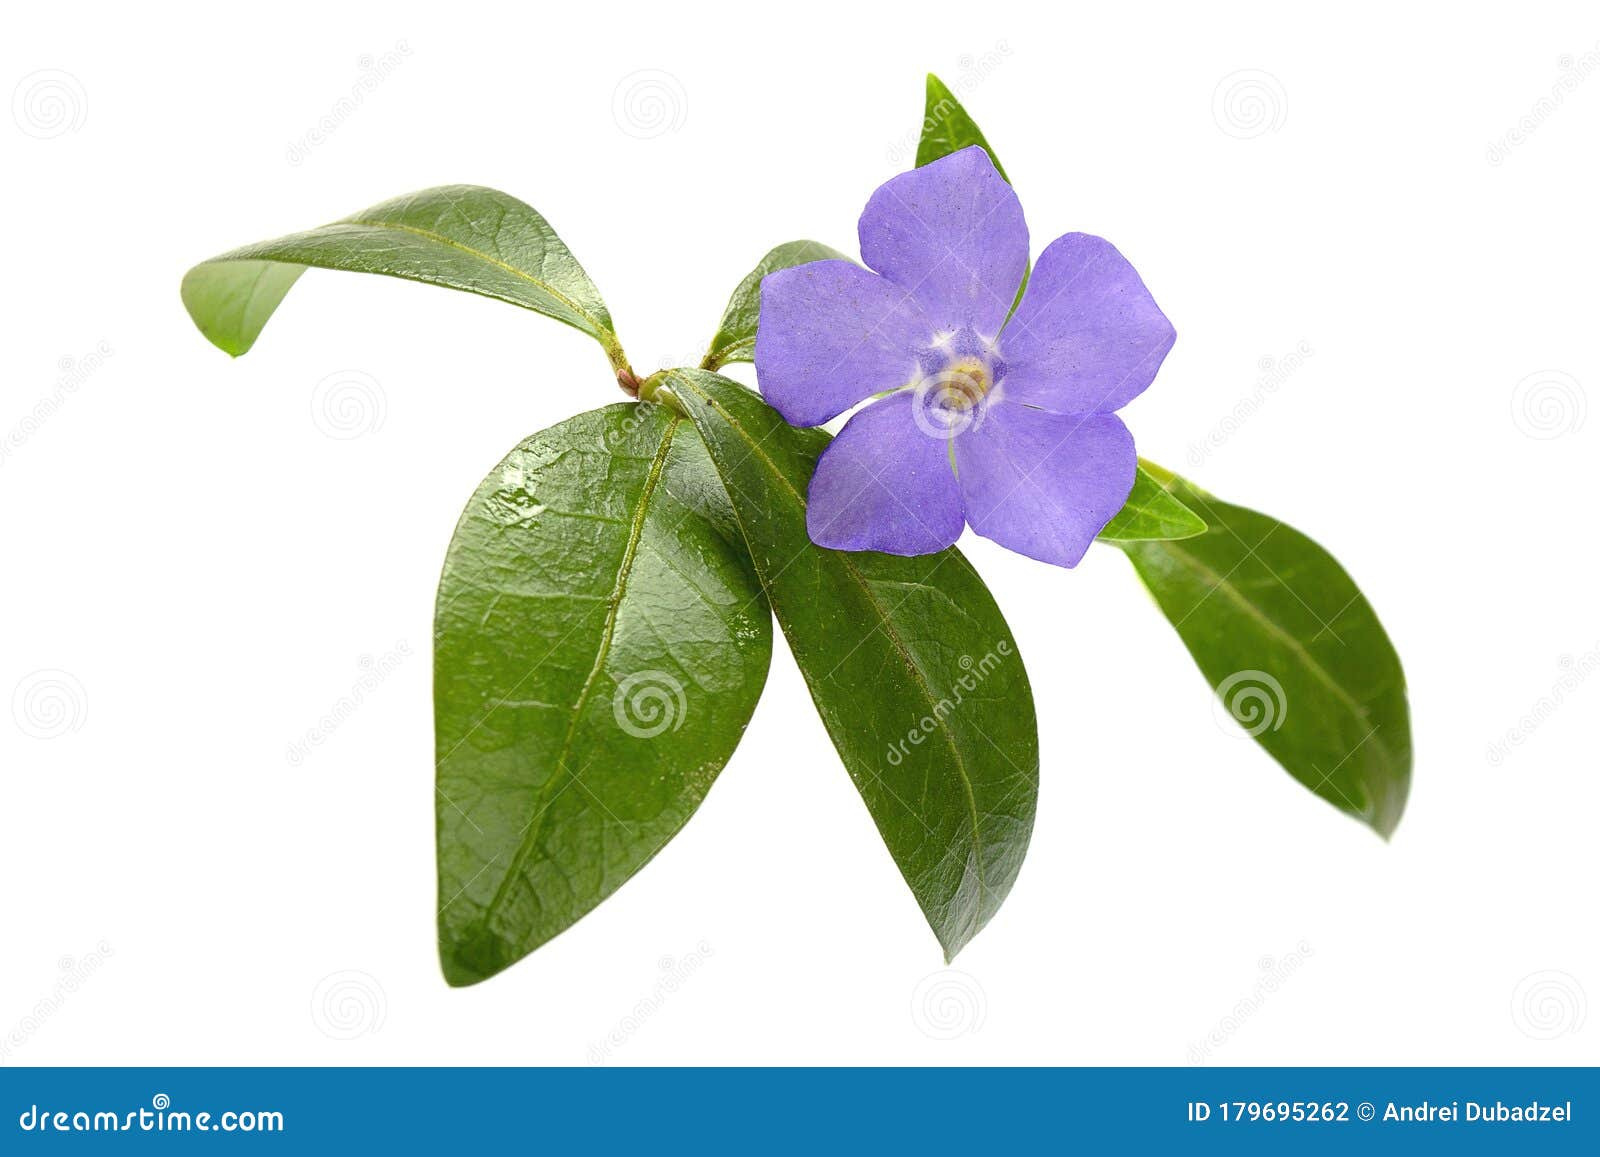 Beautiful Blue Periwinkle Flower With Green Leaves Isolated On A White Background Periwinkle Isolated On White Stock Photo Image Of Blooming Flower 179695262